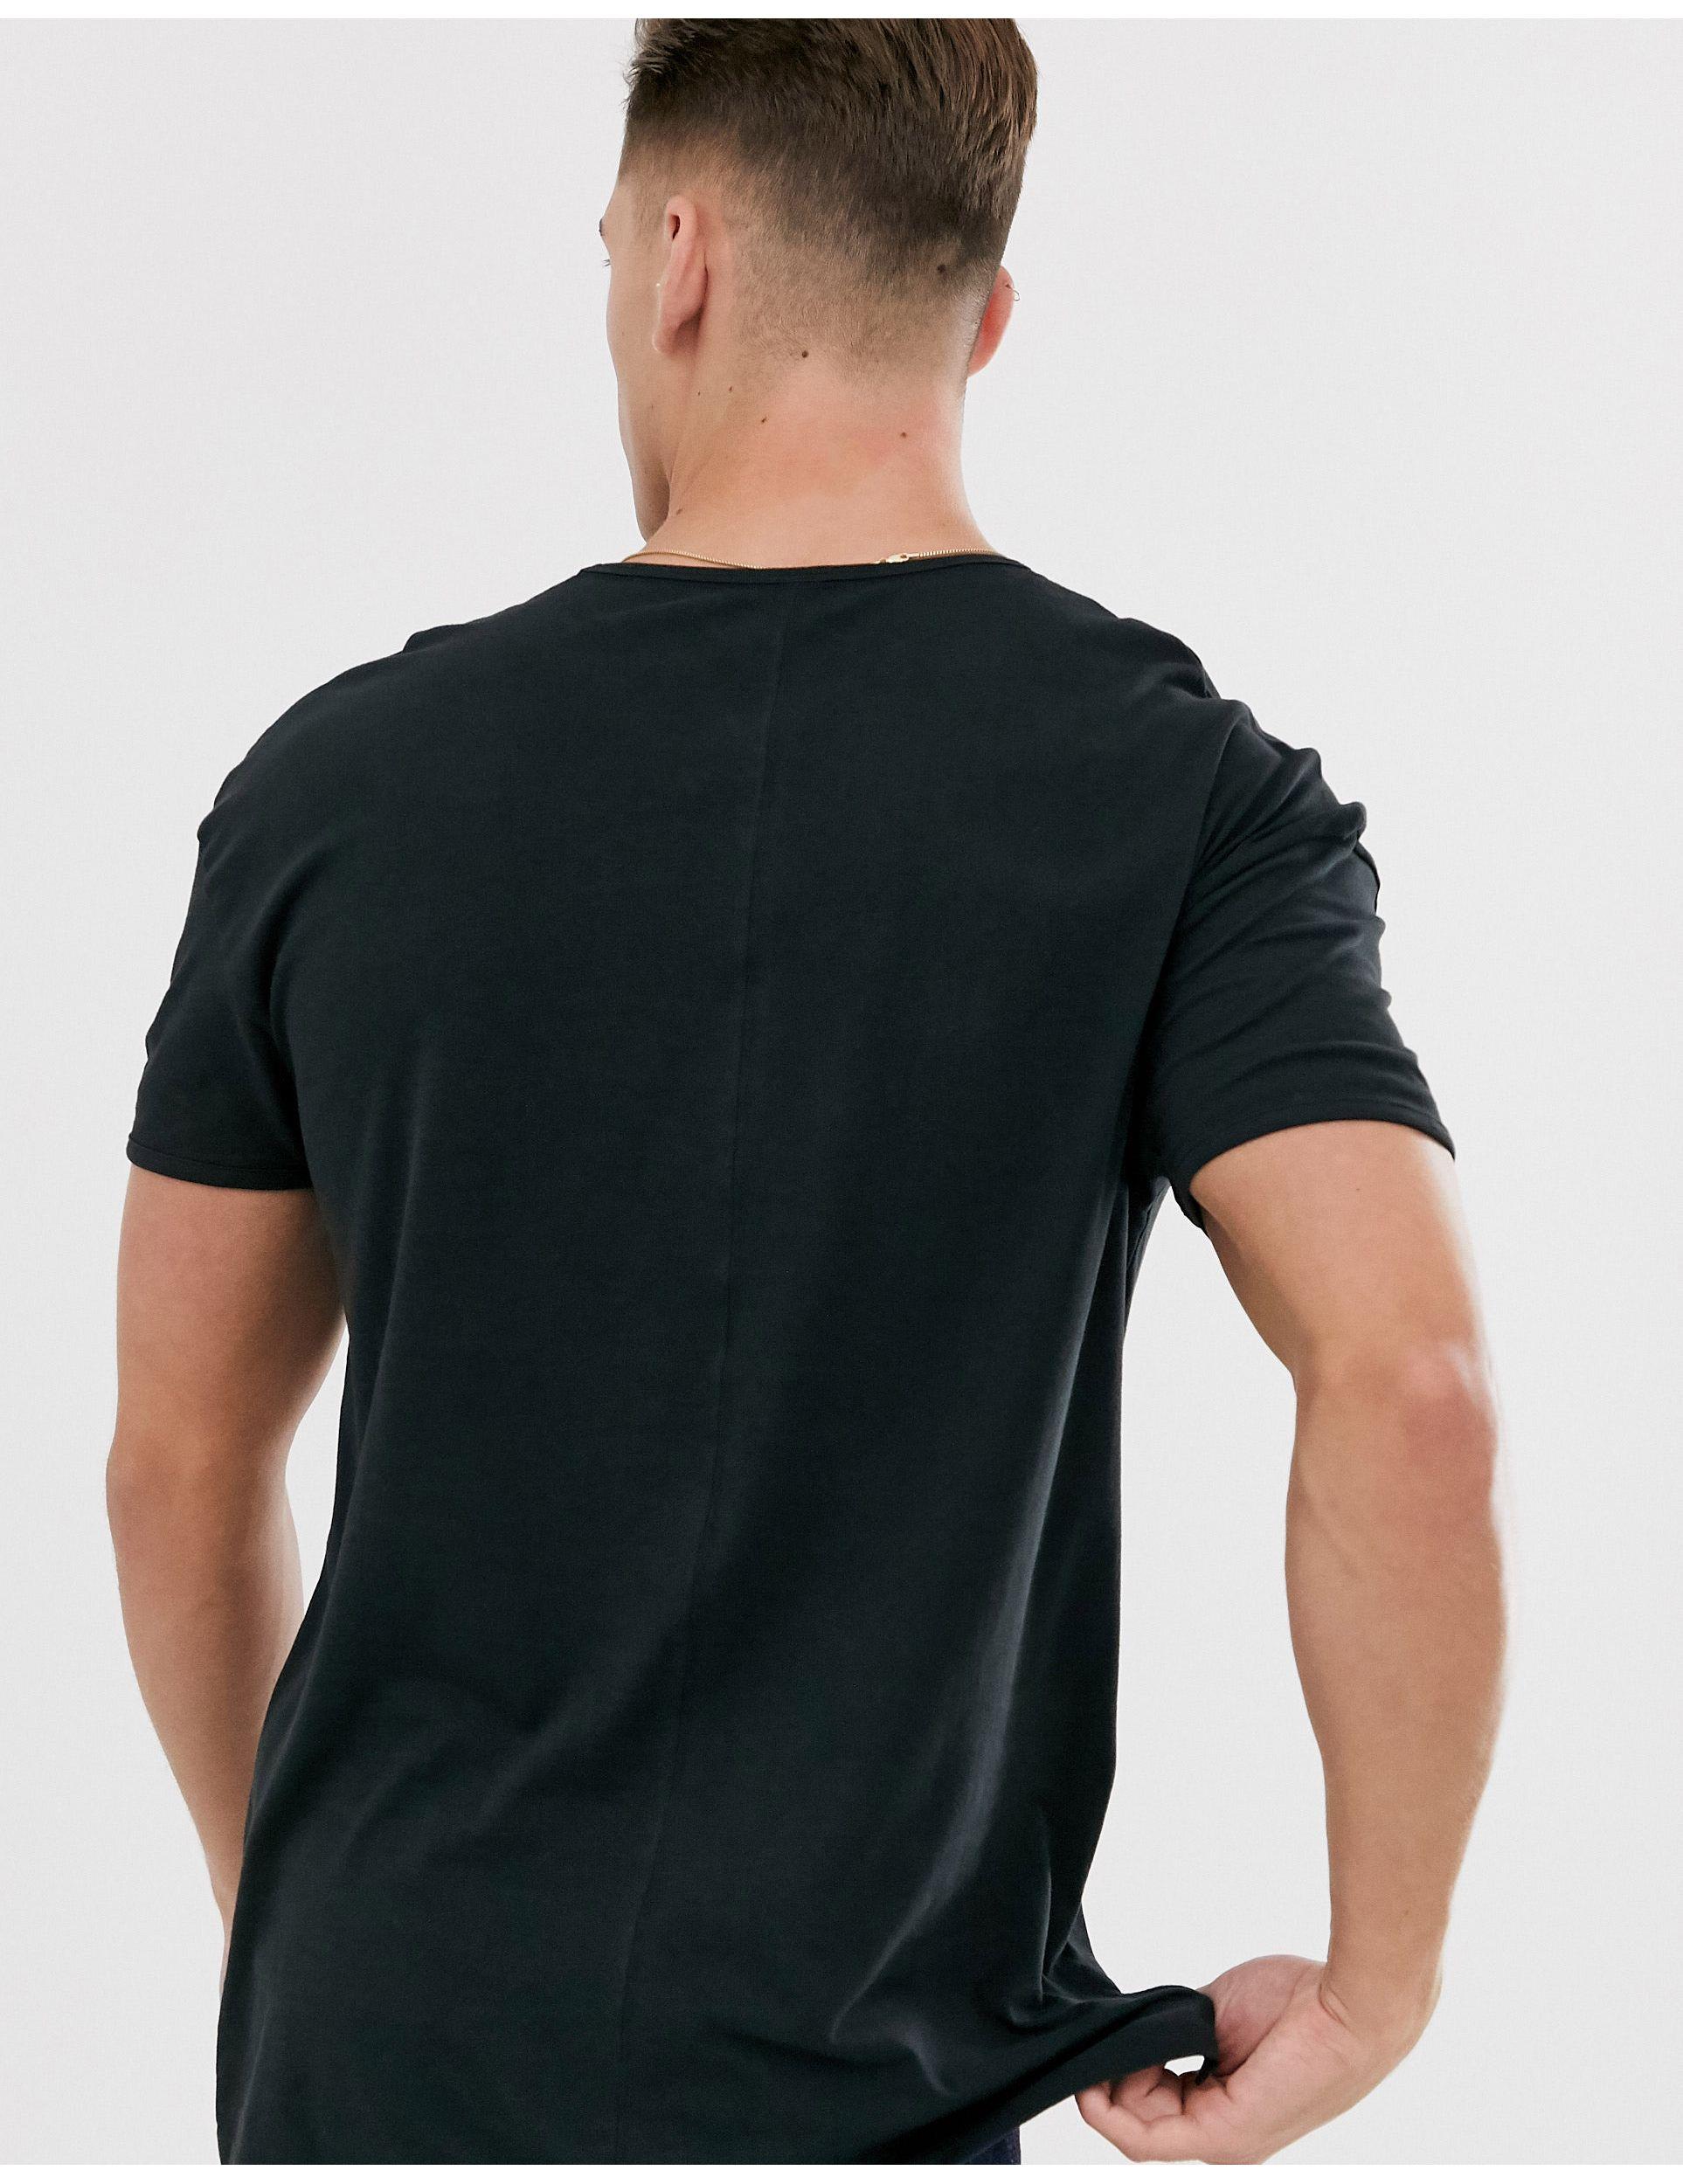 SELECTED Cotton Boxy Fit T-shirt in Black for Men - Lyst